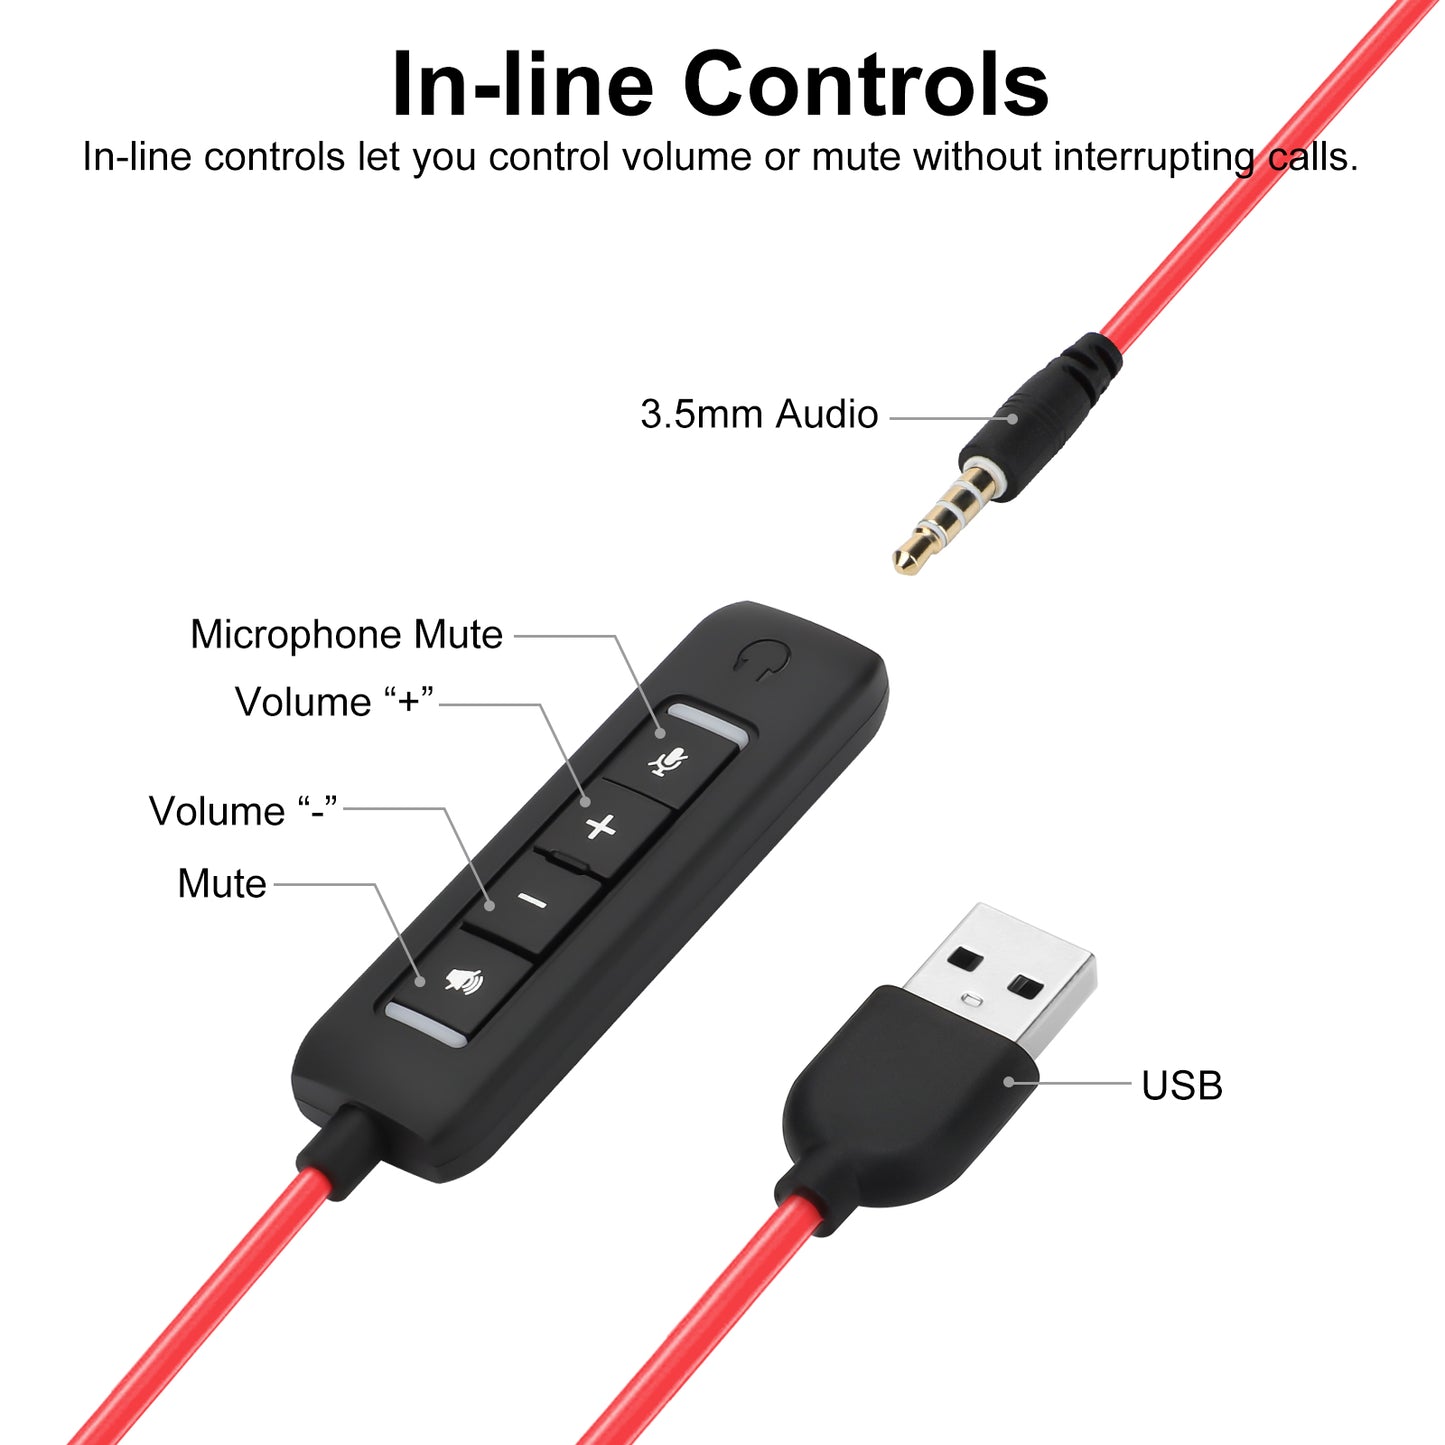 USB C/3.5mm Jack Wired On-Ear Headset - with Detachable Noise Canceling Microphone and Inline Controls Universal Connectivity for PC, Mac, Smart Devices